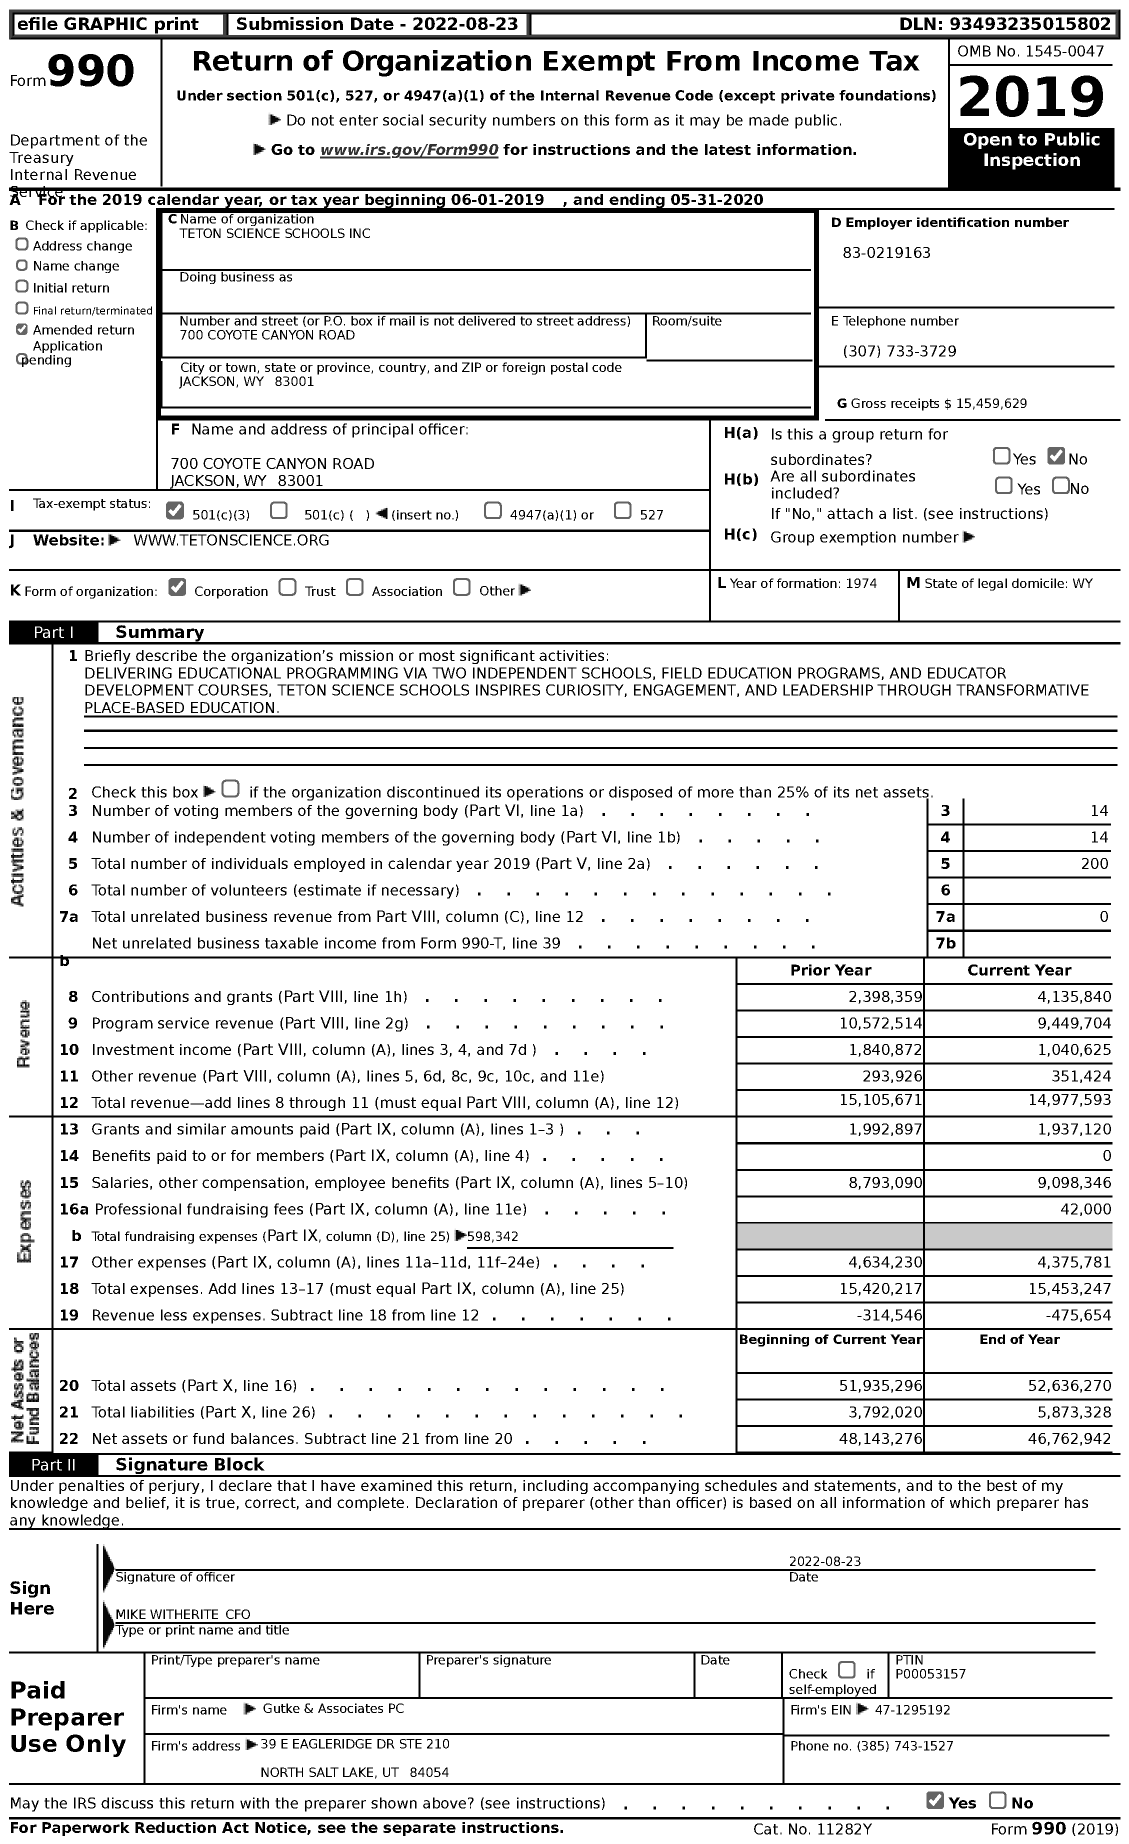 Image of first page of 2019 Form 990 for Teton Science Schools (TSS)